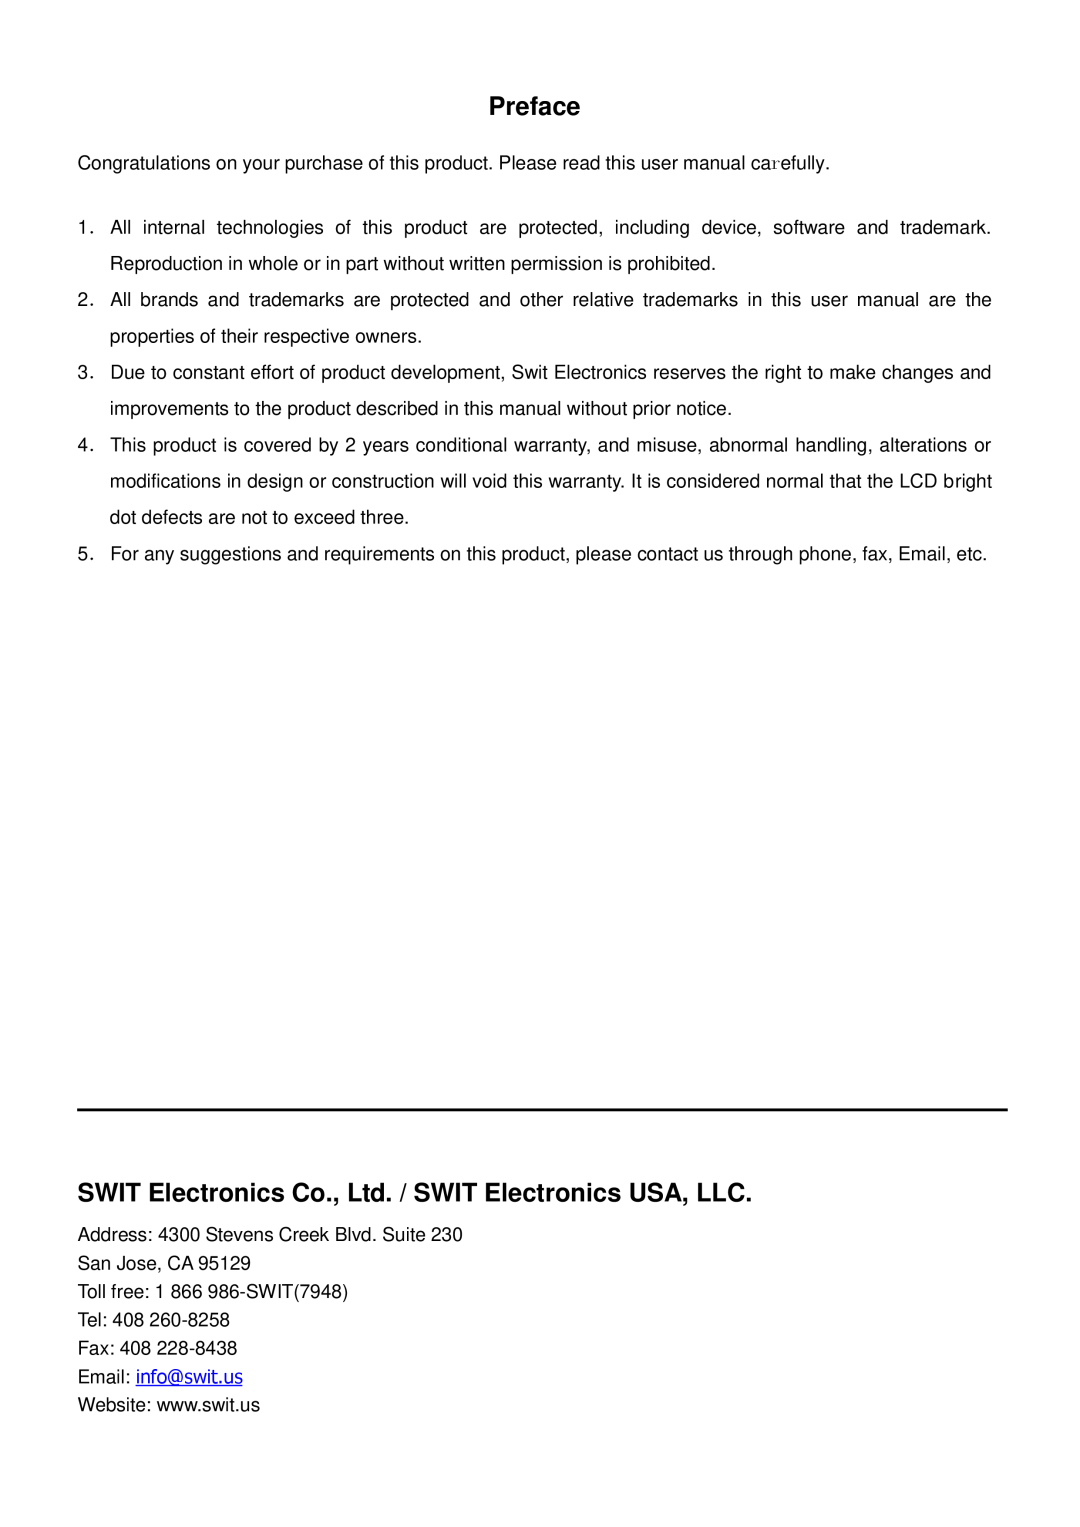 JVC DT-X71H, DT-X71C, DTX71H, DT-X71F user manual Preface, Email info@swit.us 